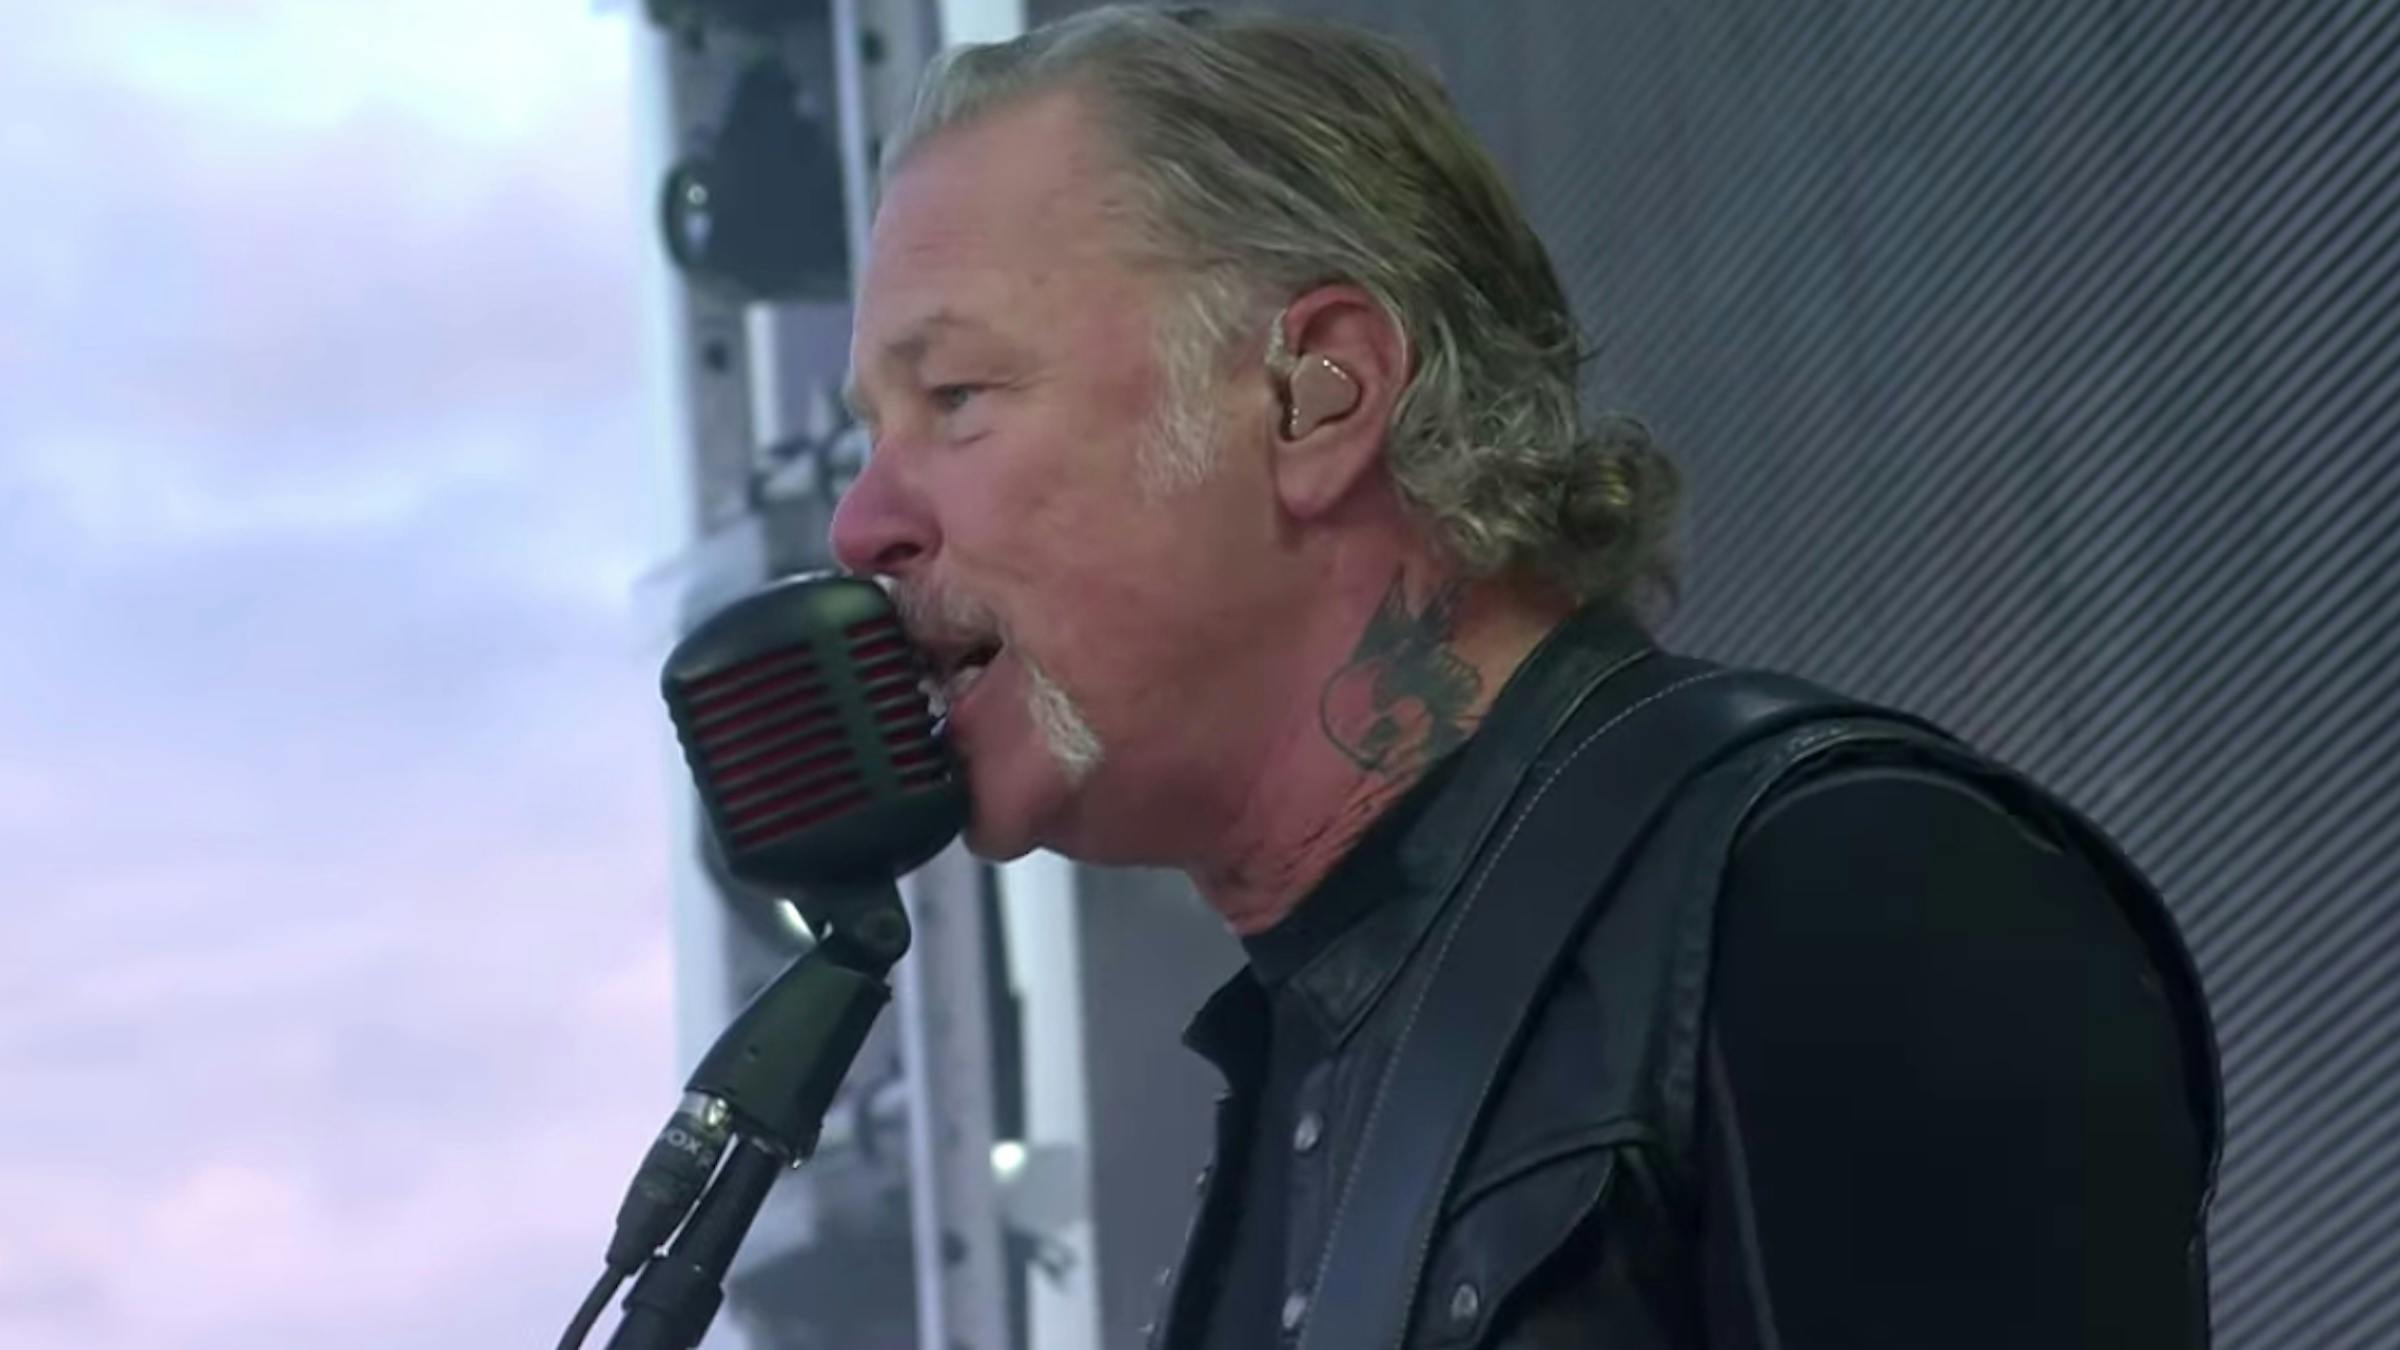 Watch Metallica Pay Tribute To Thin Lizzy's Phil Lynott At Their Ireland Show